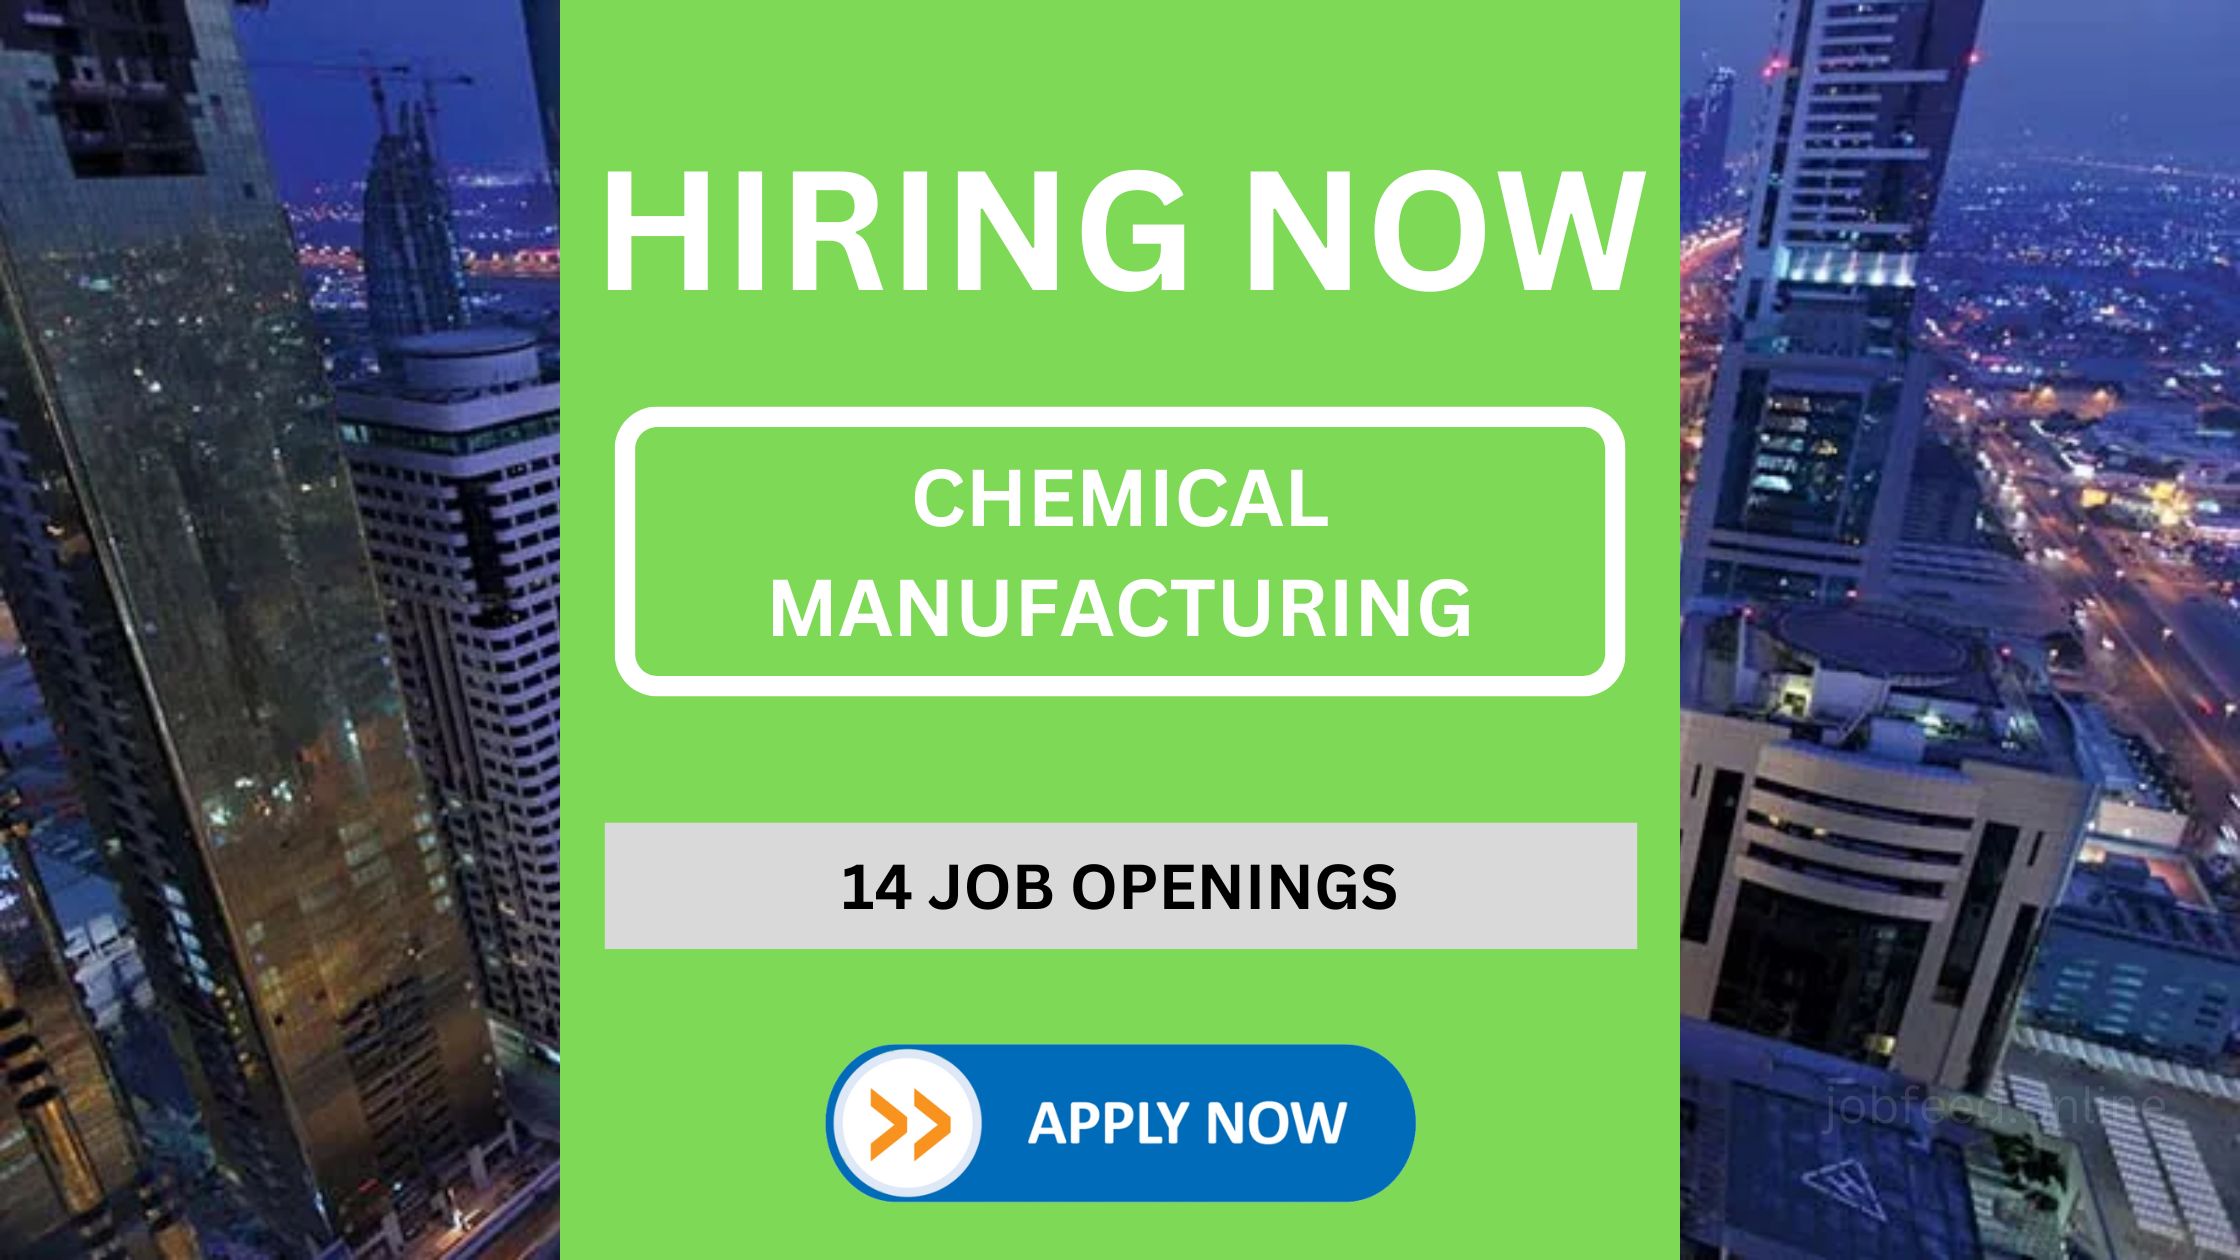 14 Job Openings at a Chemical Manufacturing Company in UAE